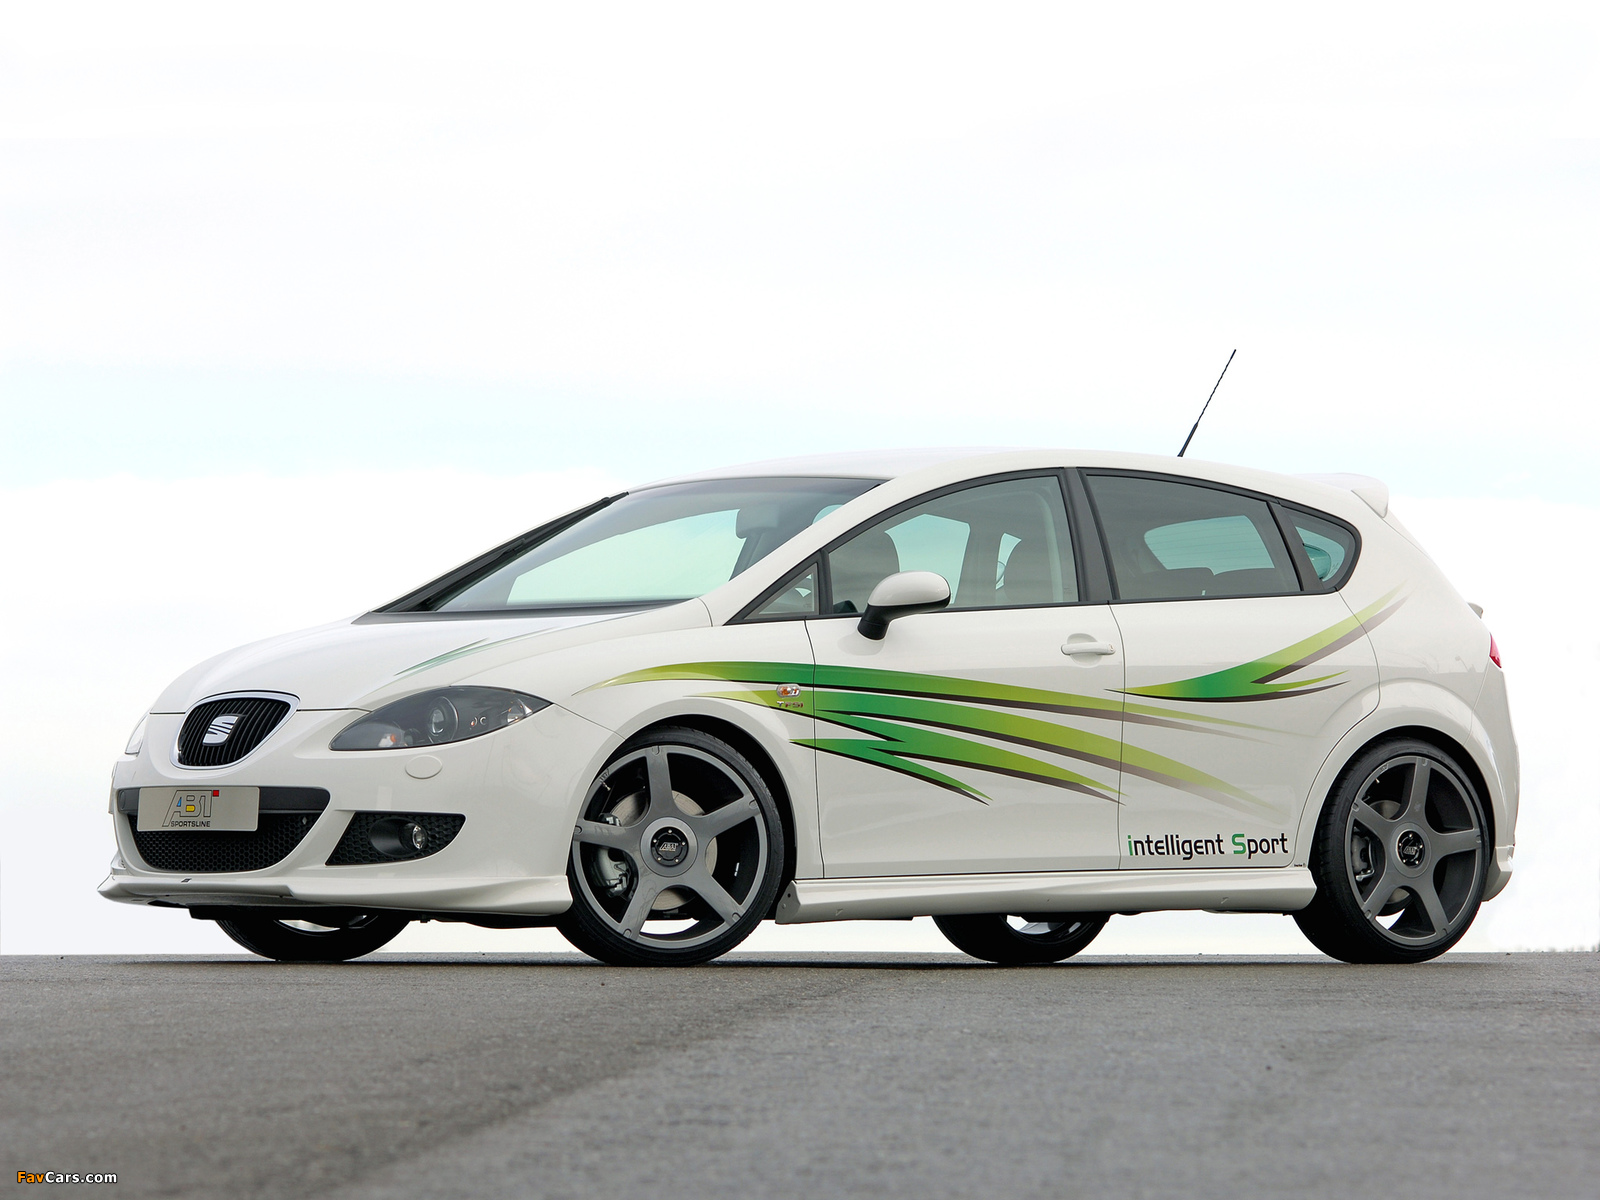 Images of ABT Seat Leon iS (1600 x 1200)